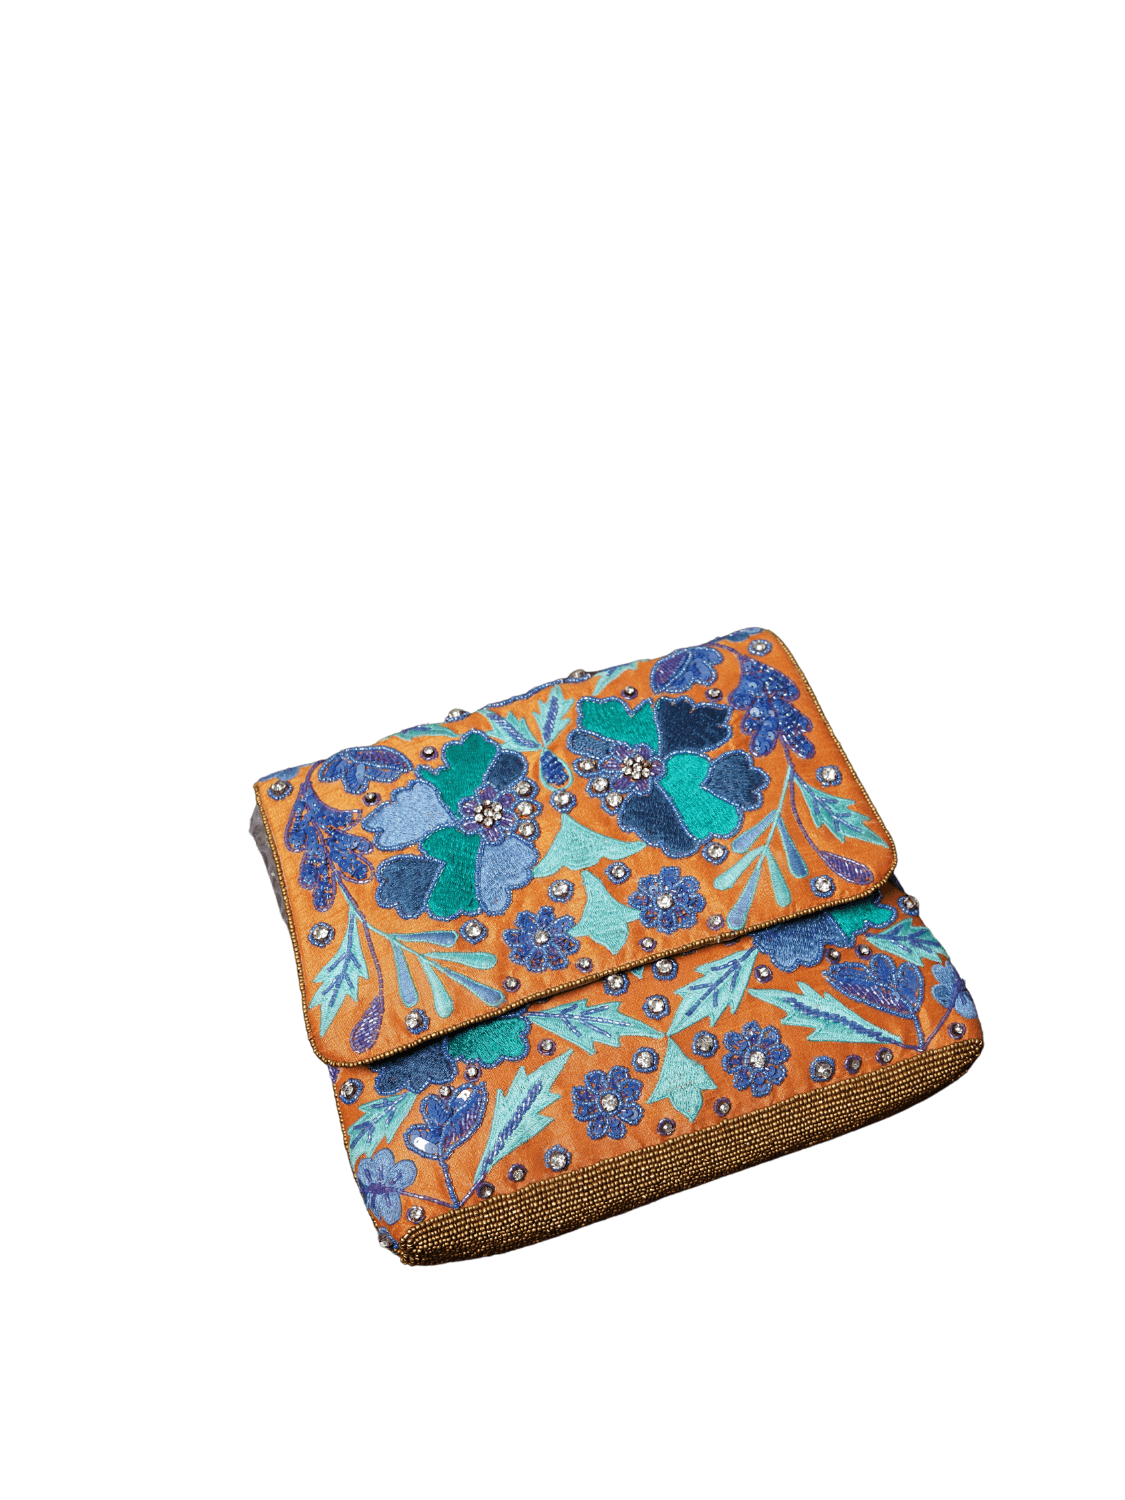 Orange-Blue Embroidered With Silver Chain Clutch Bag